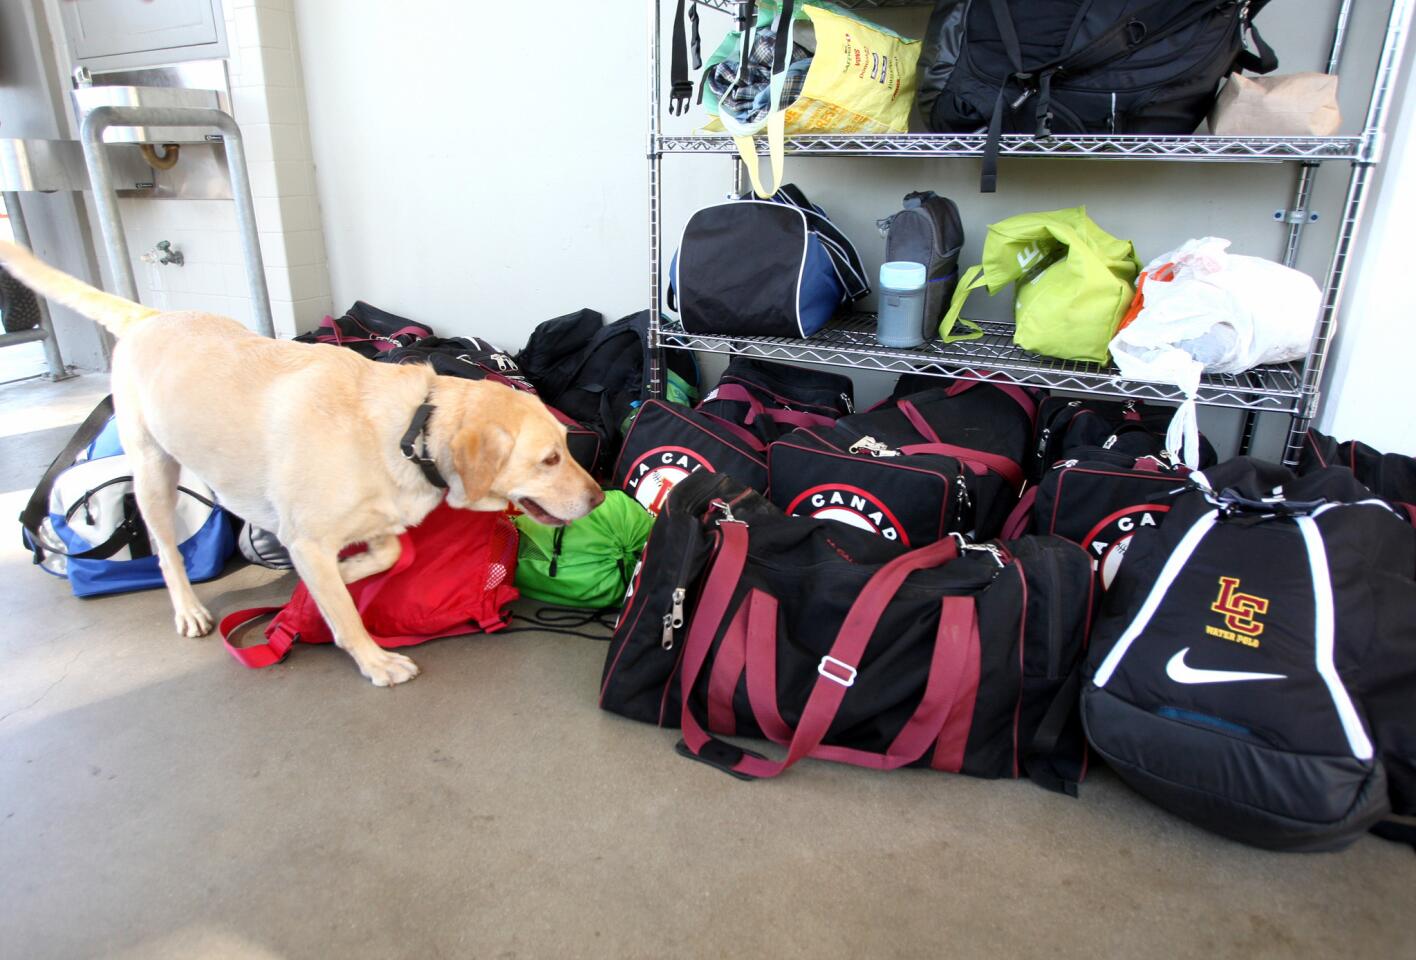 A contraband-sniffing dog named Cali, from Interquest Detection Canines, checks backpacks for any potential illegal substances at La Cañada High School in La Cañada Flintridge on Thursday, April 20, 2017. The dog also checked classrooms, lockers and parked cars.